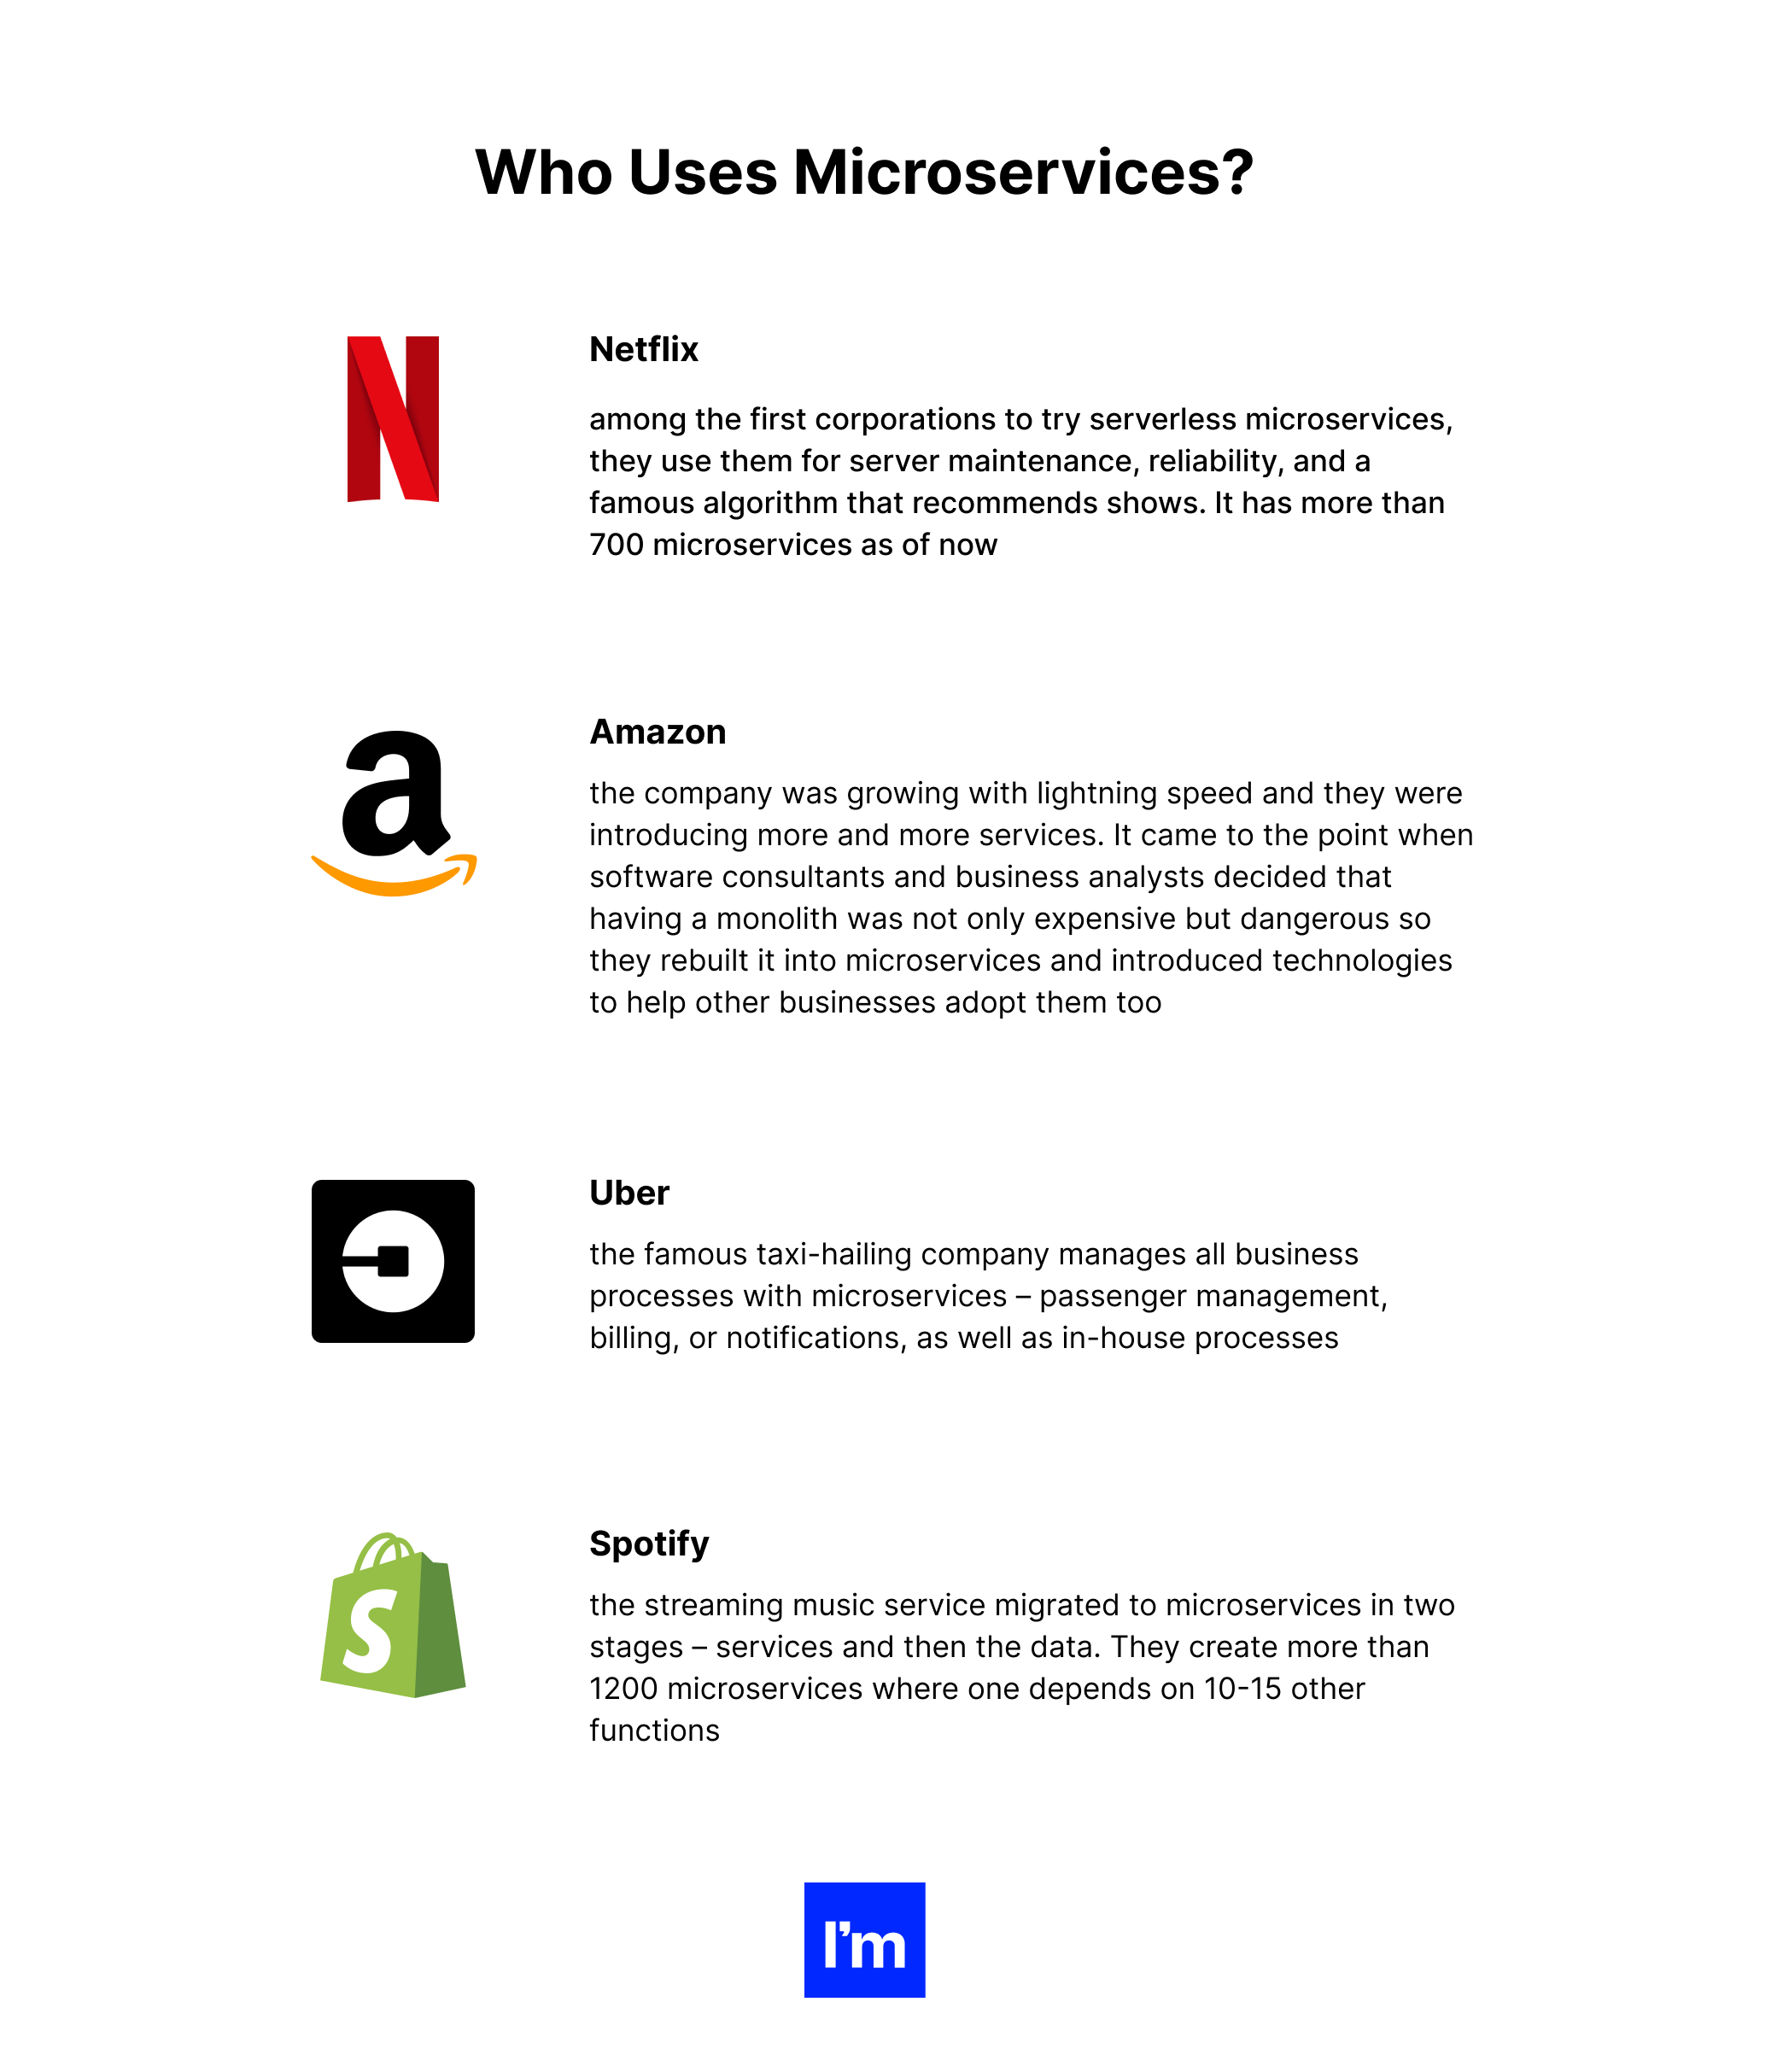 Who uses microservices